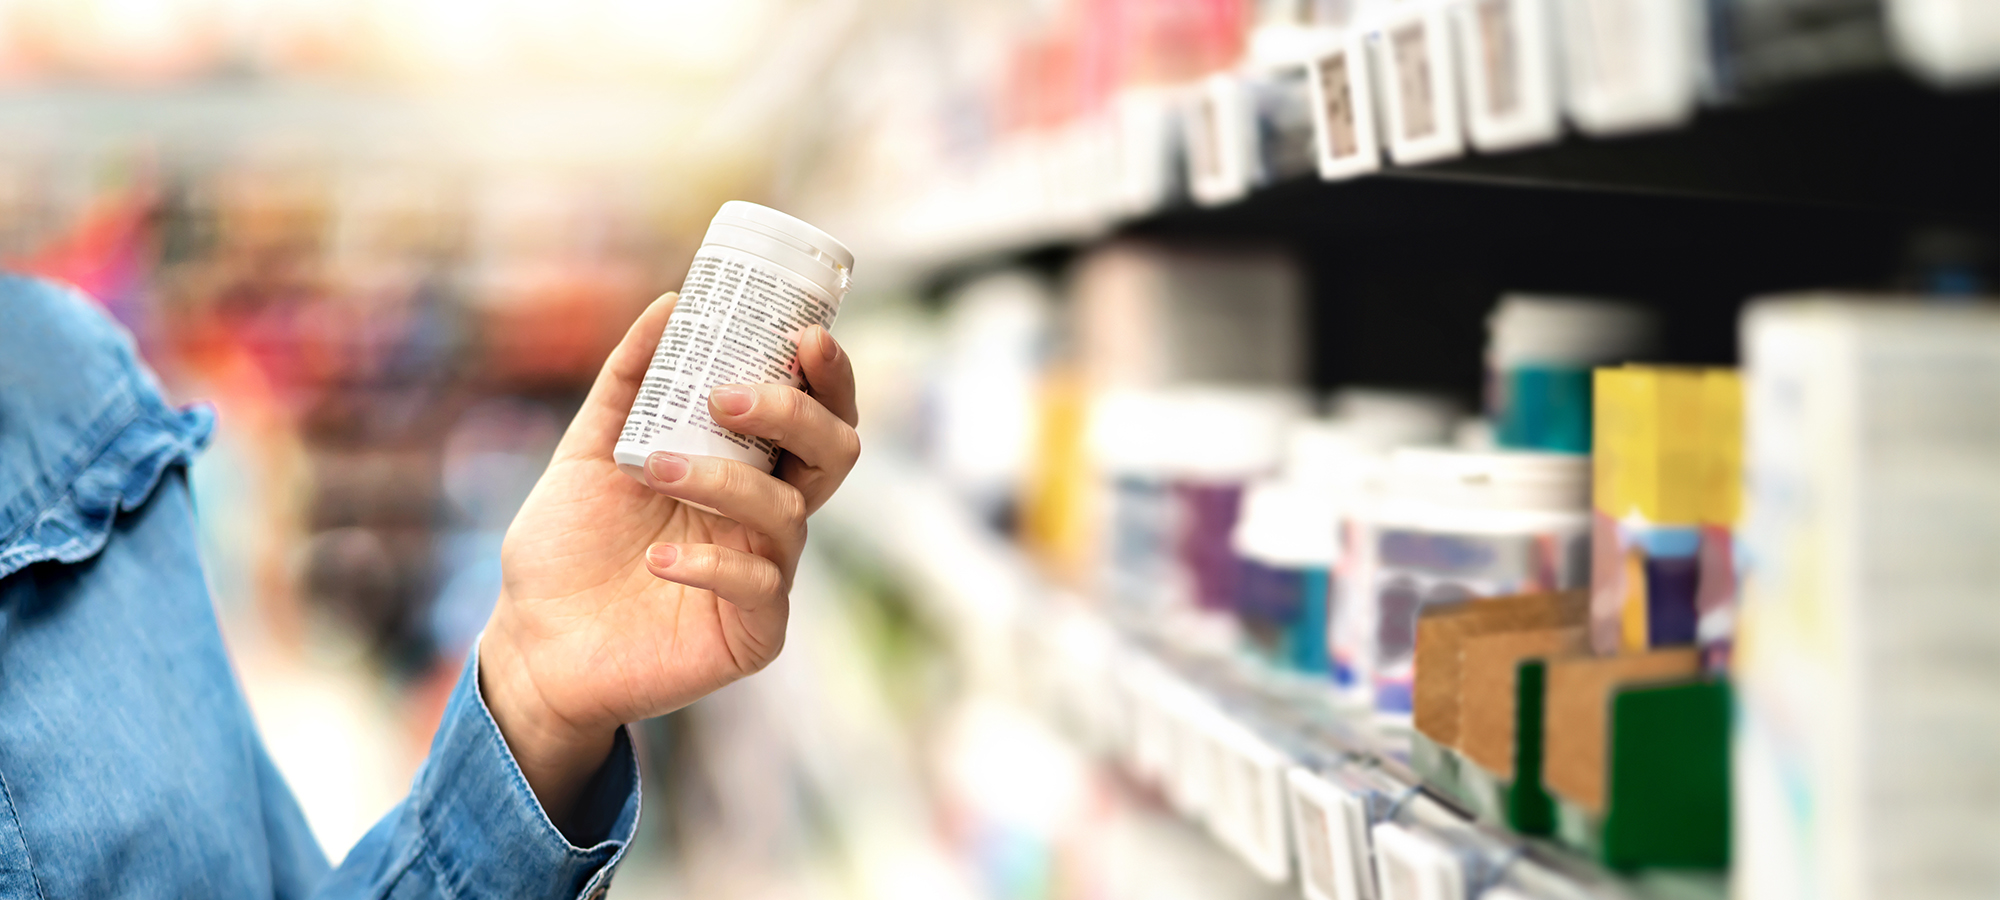 Customer in pharmacy holding medicine bottle. Woman reading the label text about medical information or side effects in drug store. Patient shopping pills for migraine or flu. Vitamin or zinc tablets.